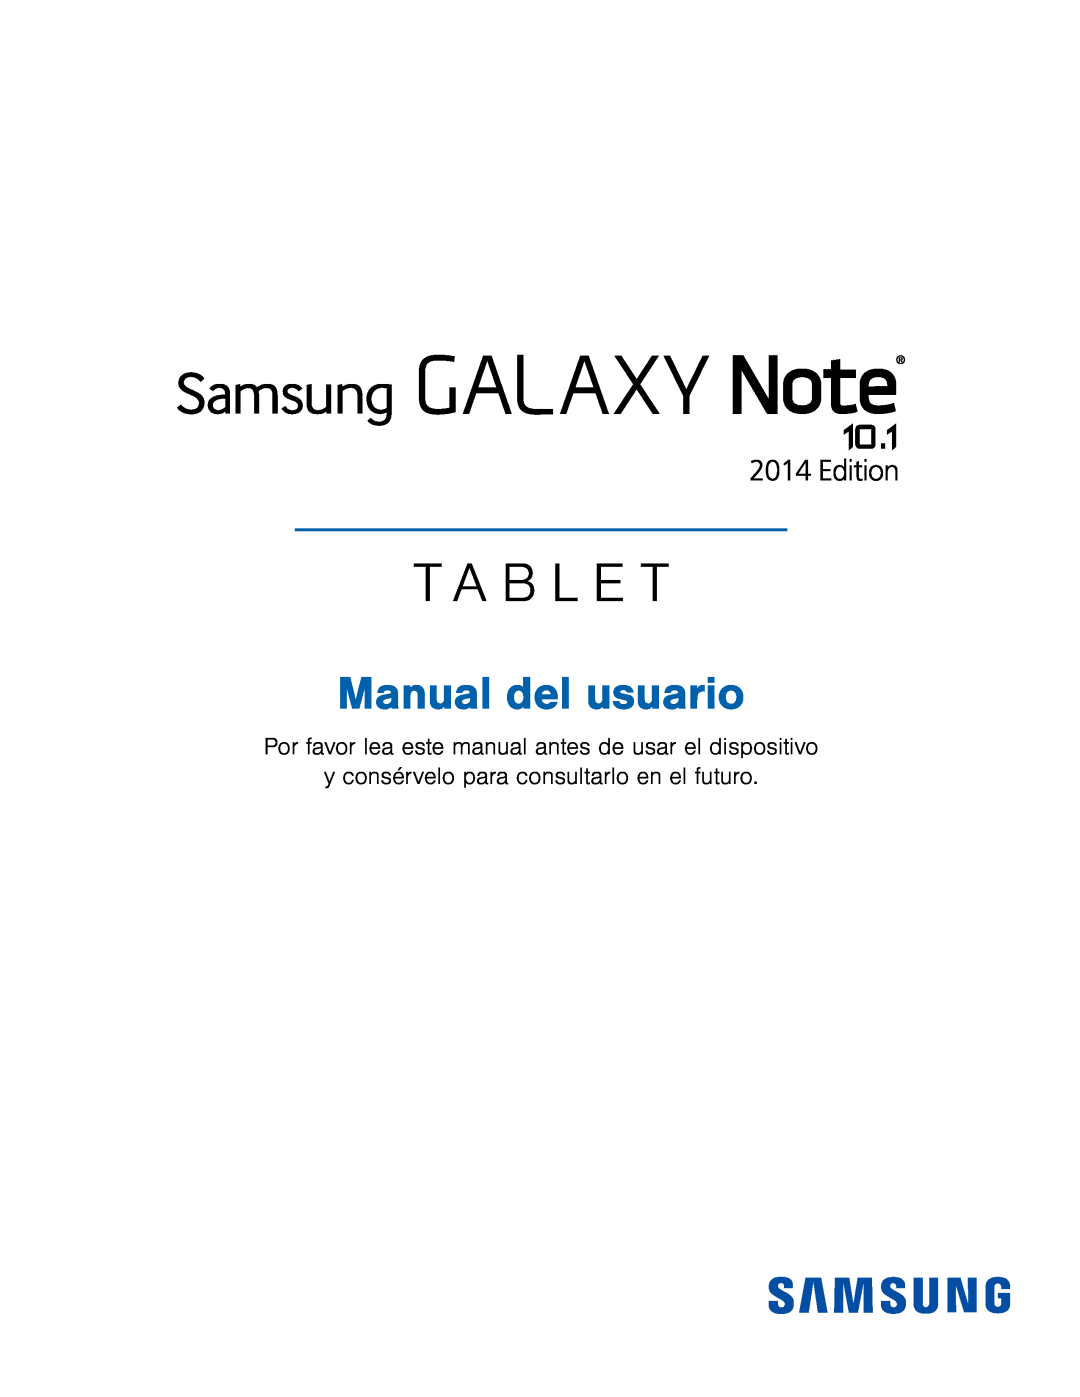 Galaxy Note 10.1 2014 Edition T-Mobile